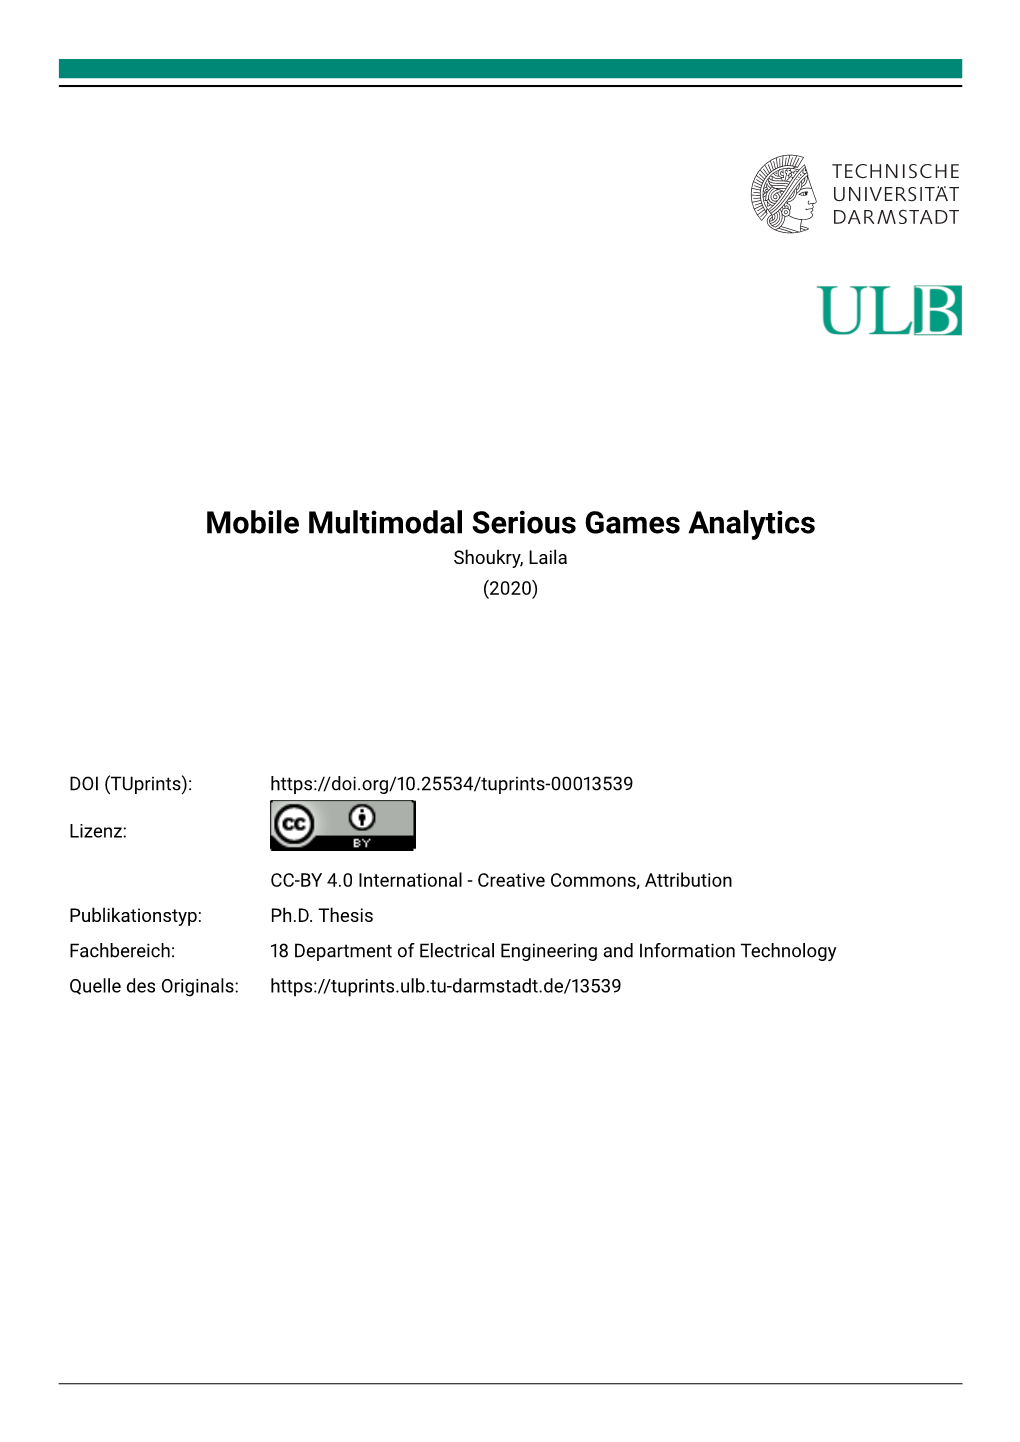 Mobile Multimodal Serious Games Analytics Shoukry, Laila (2020)